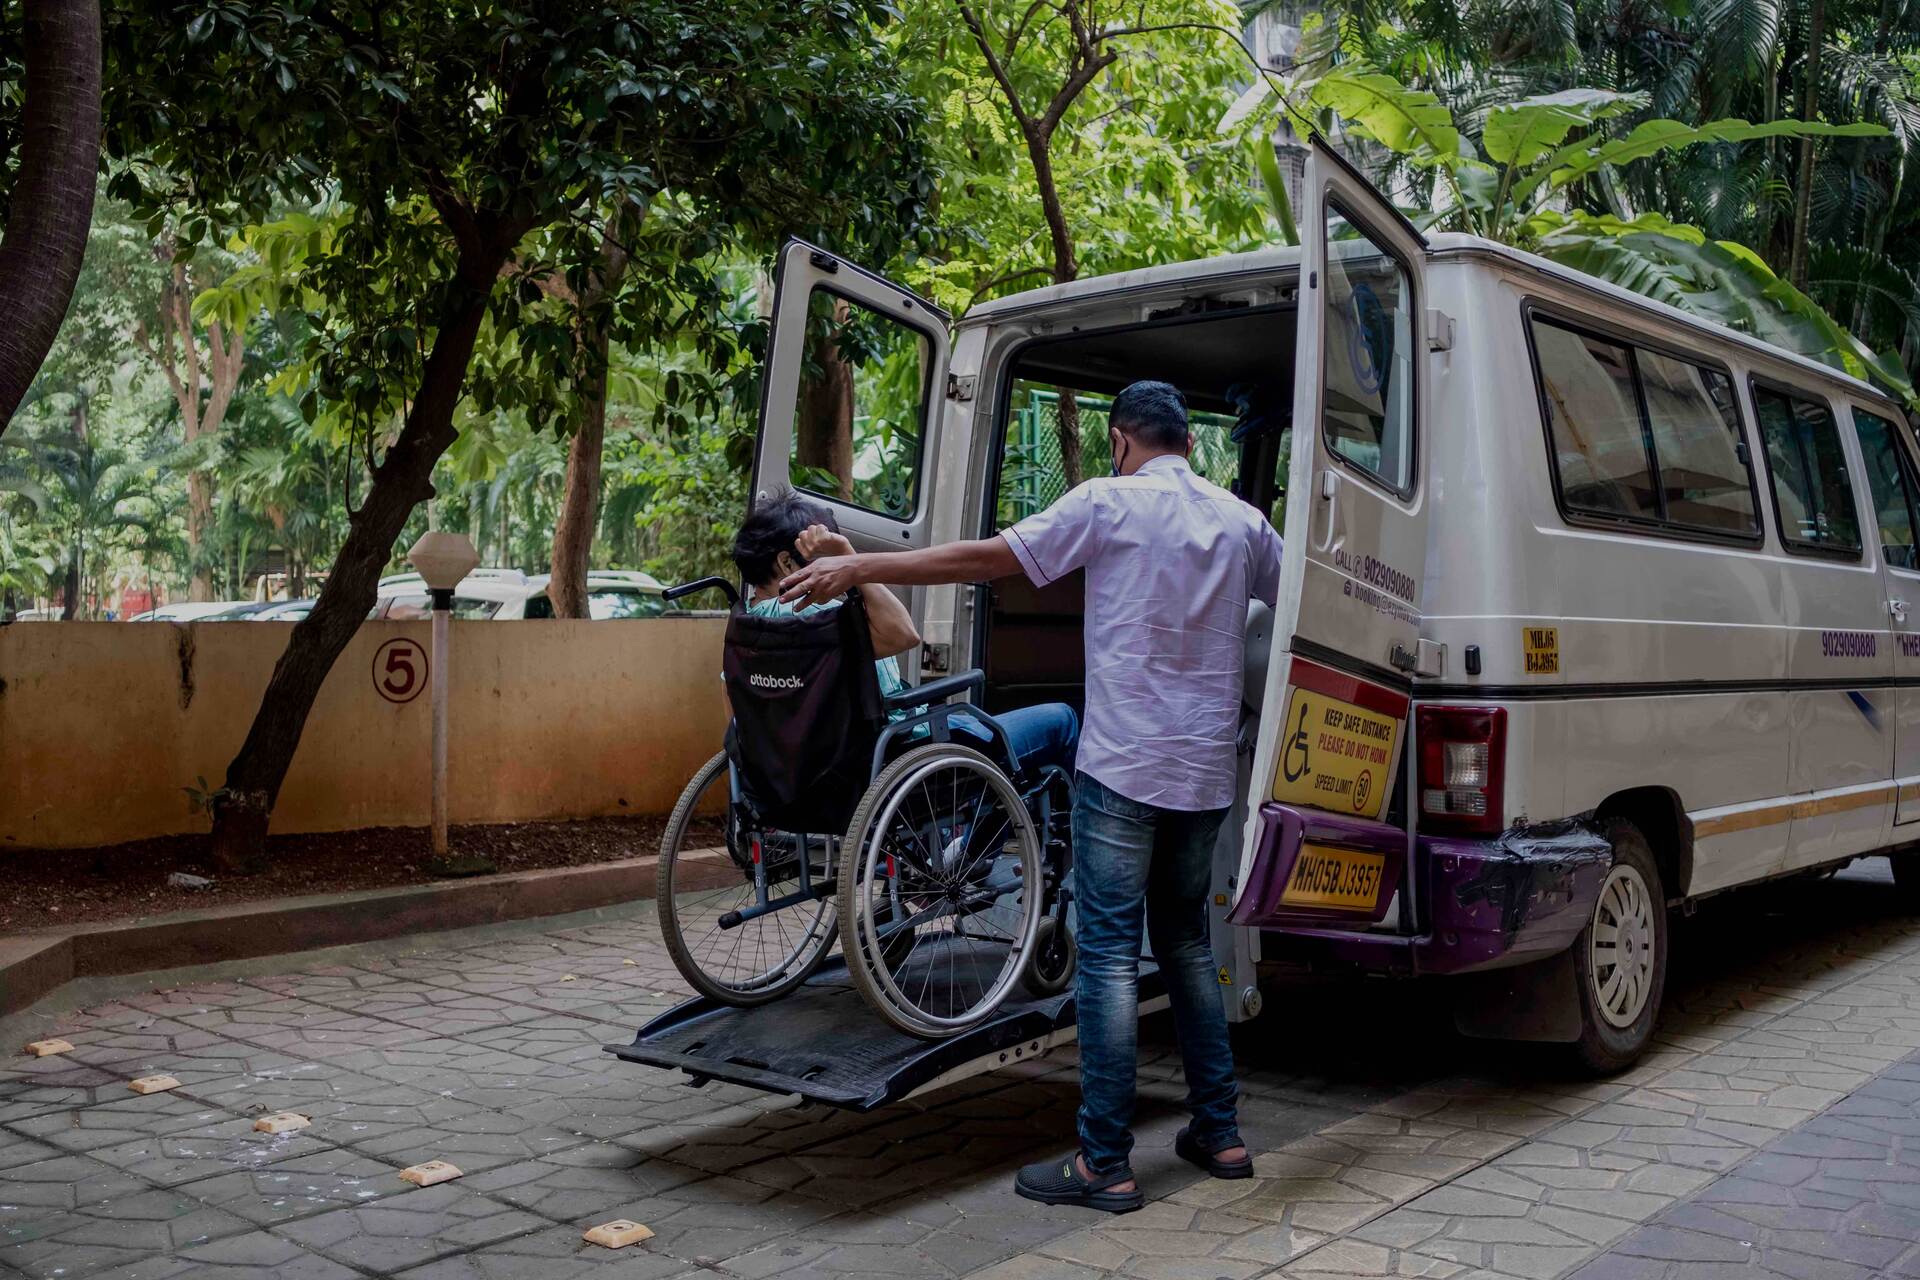 A man uses a lift to help a person in a wheelchair into a taxi van.